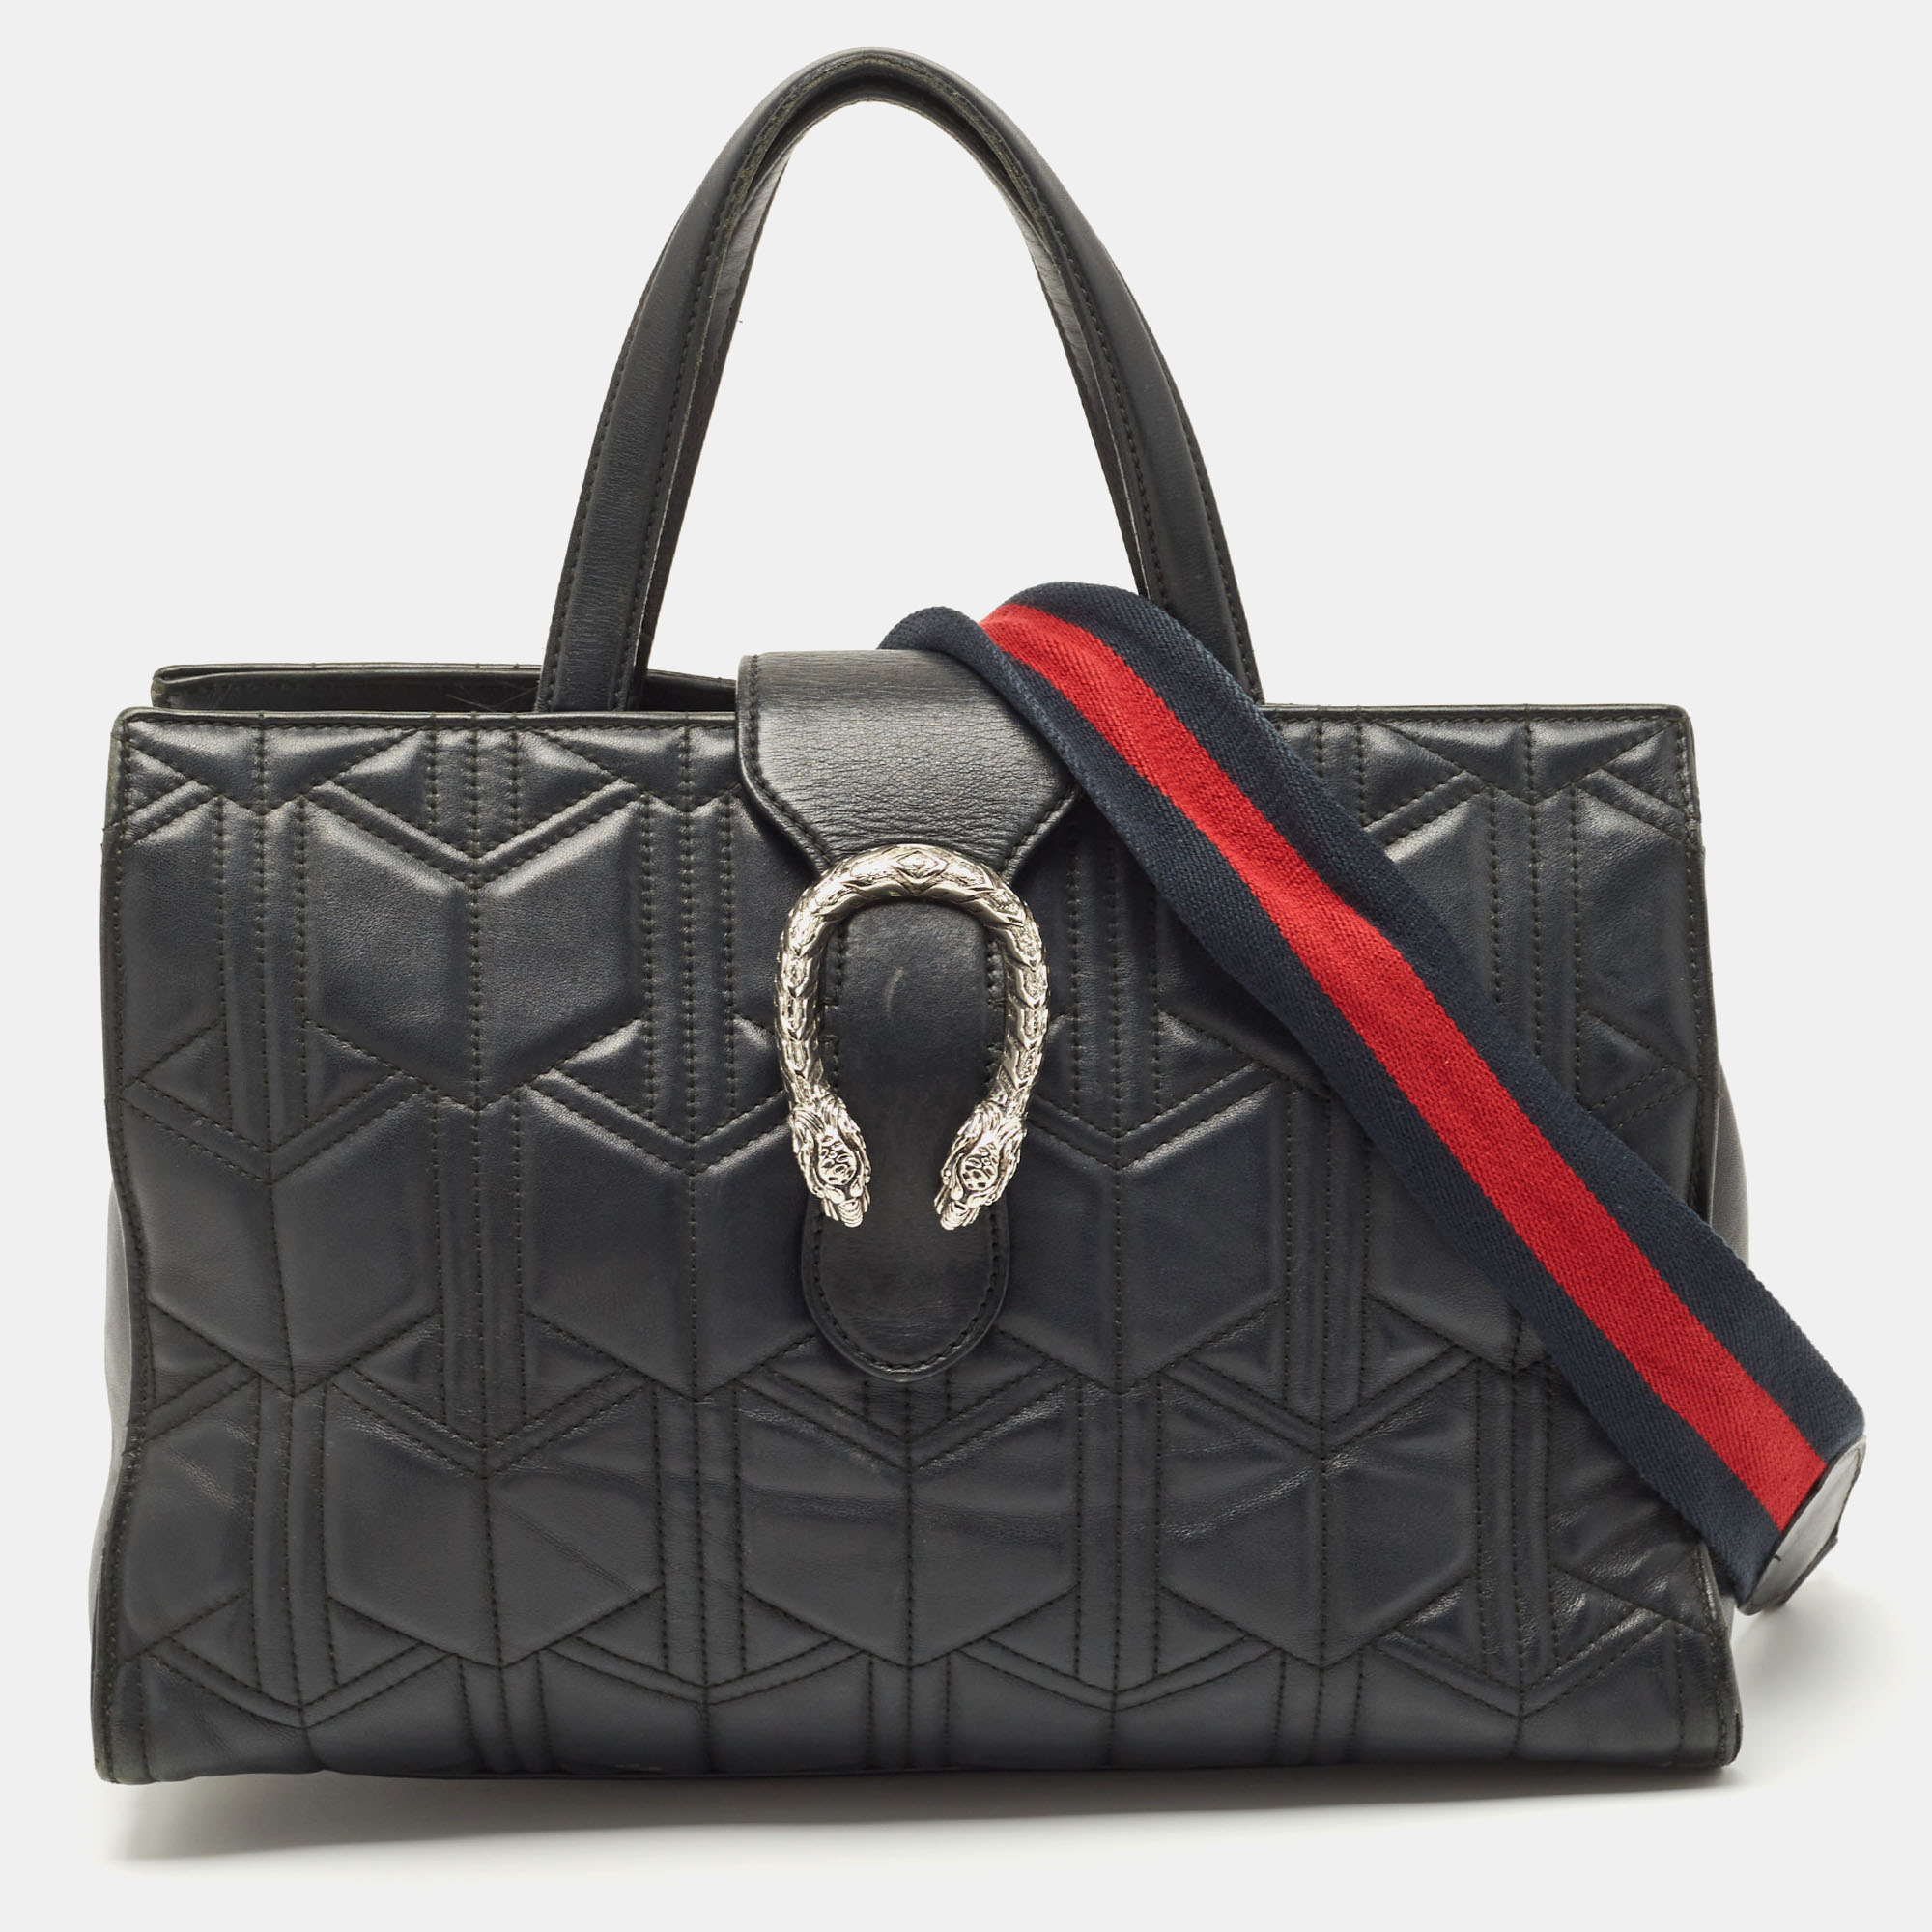 Pre-owned Gucci Black Quilted Leather Dionysus Flap Tote